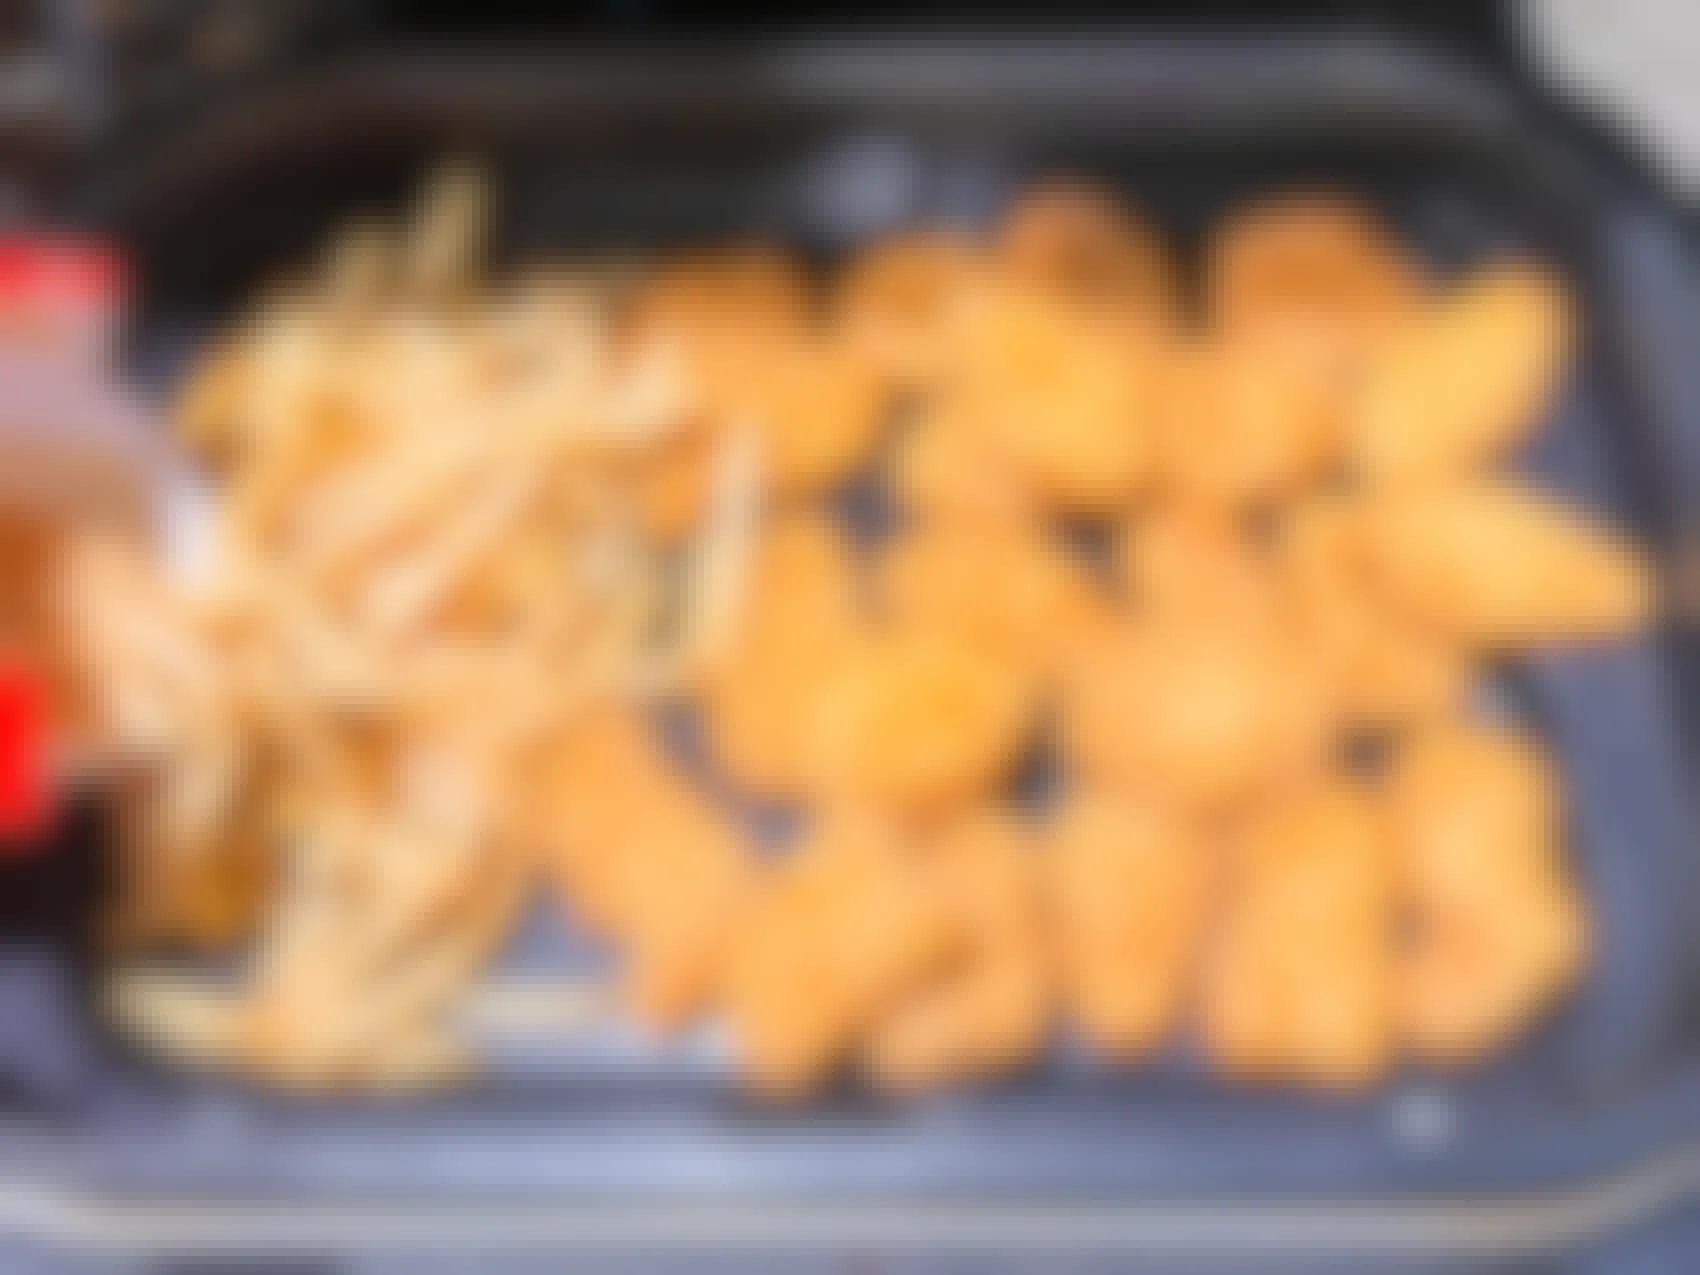 Chicken nuggets and fries inside an air fryer